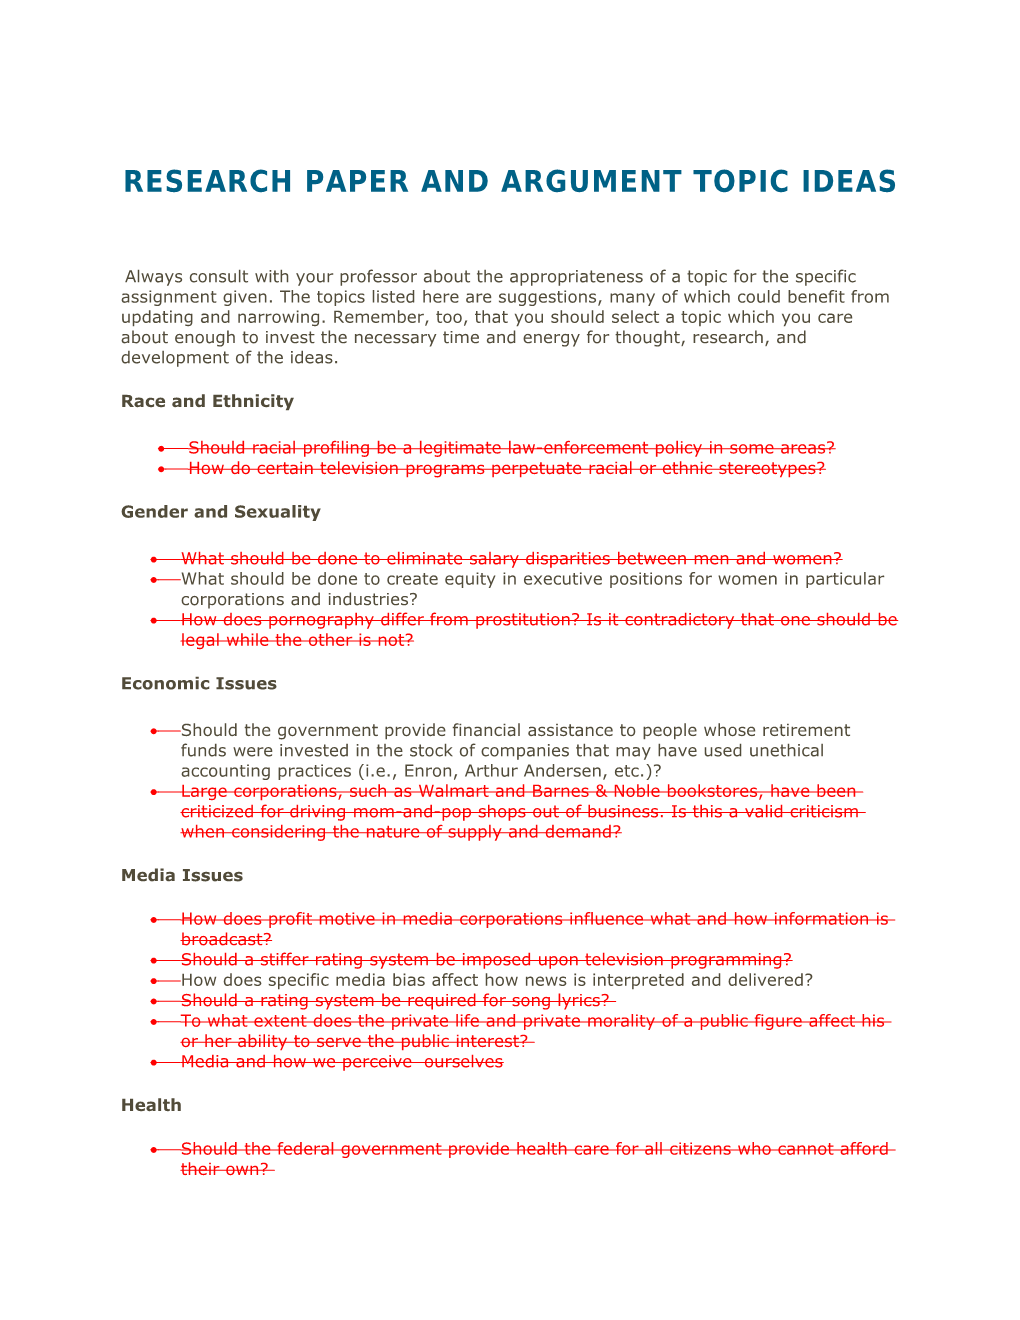 Research Paper and Argument Topic Ideas